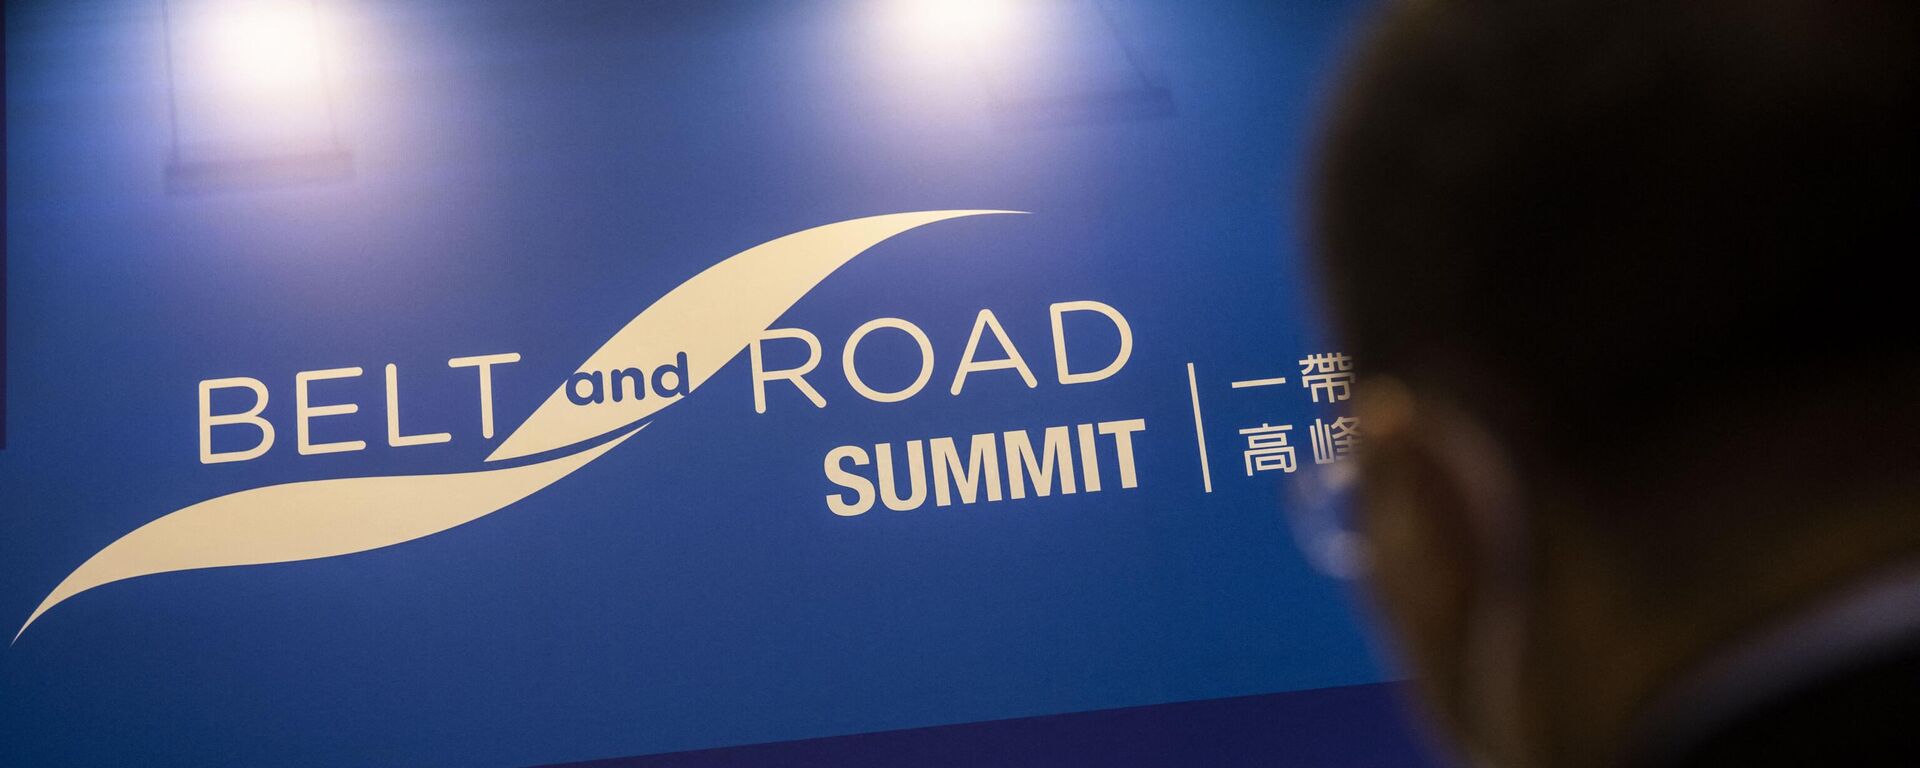 A man attends the Belt and Road Summit in Hong Kong on August 31, 2022 - Sputnik India, 1920, 04.01.2023